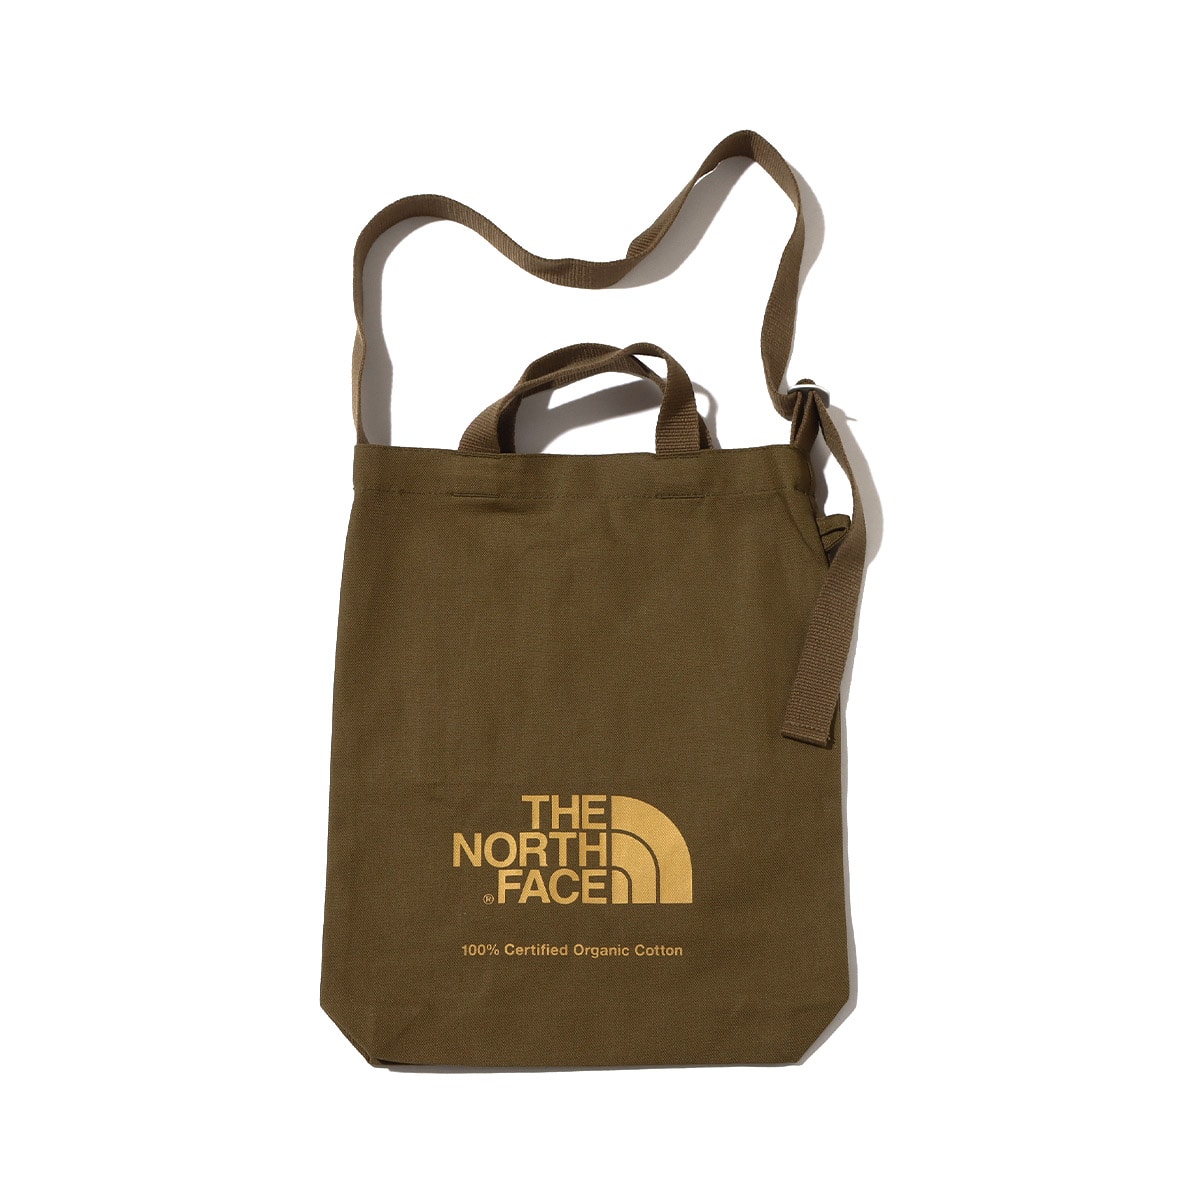 THE NORTH FACE K ORGANIC COTTON TOTE ミリタリーオリーブxハニー